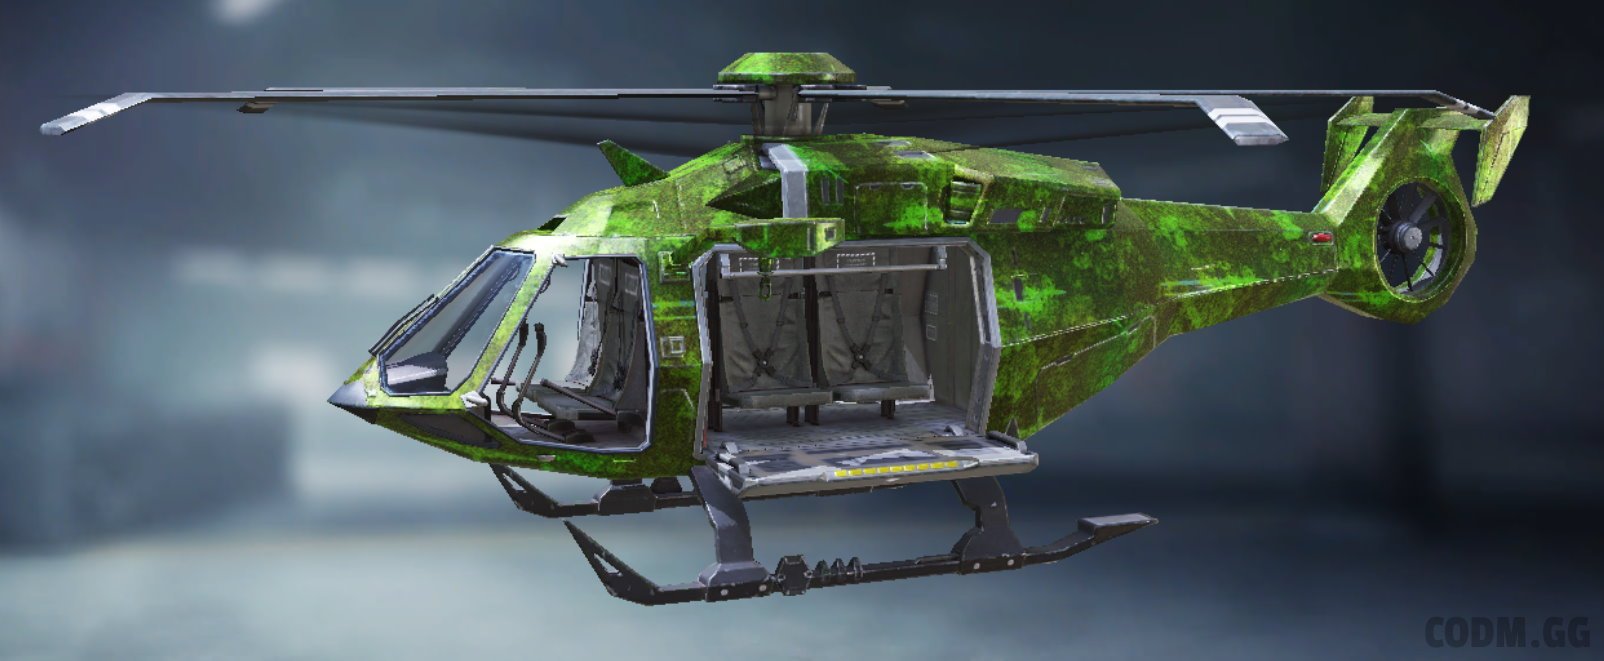 Helicopter Radion Burst, Epic camo in Call of Duty Mobile